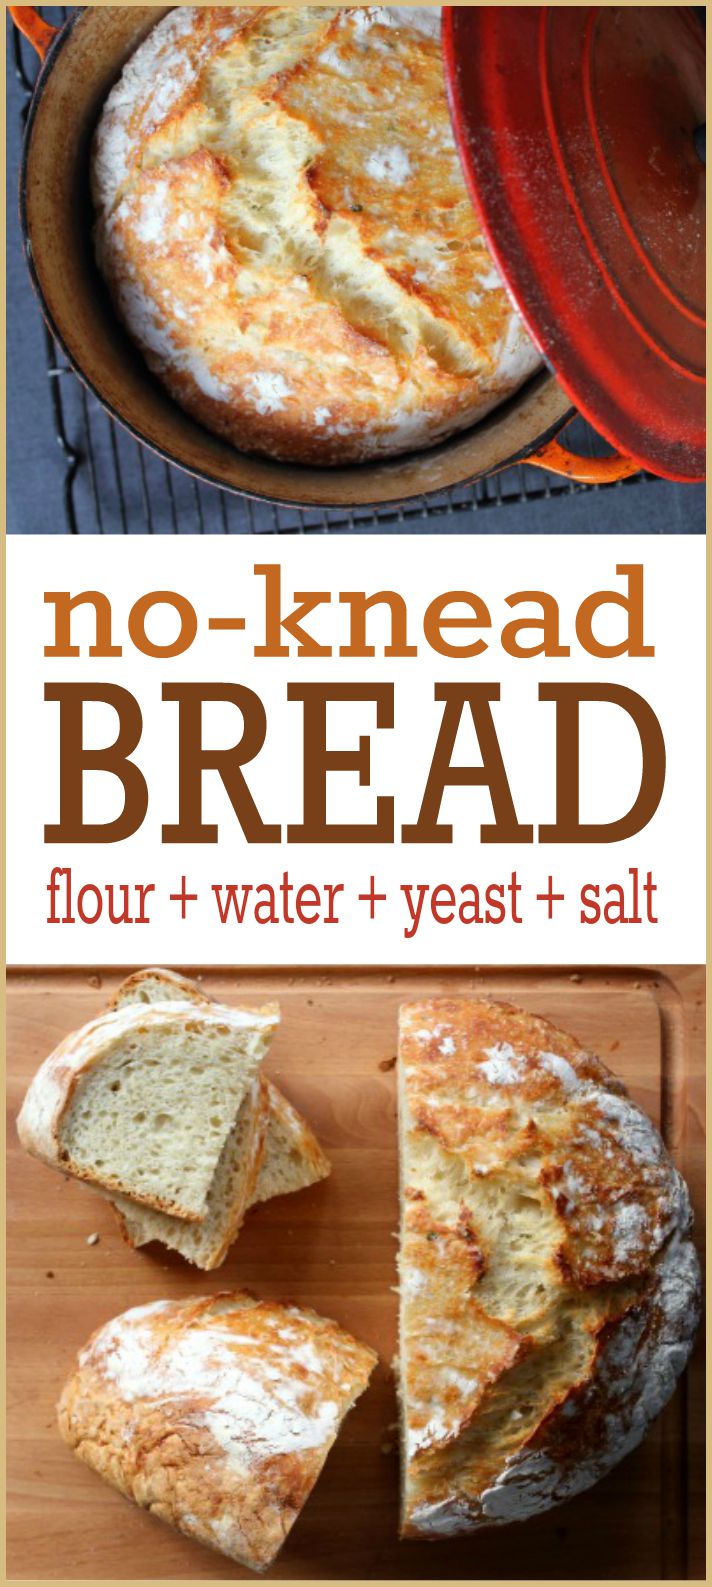 No-Knead Bread Recipe -- This wildly popular no-knead bread recipe is so simple, absolutely ANYONE can make it. We promise!